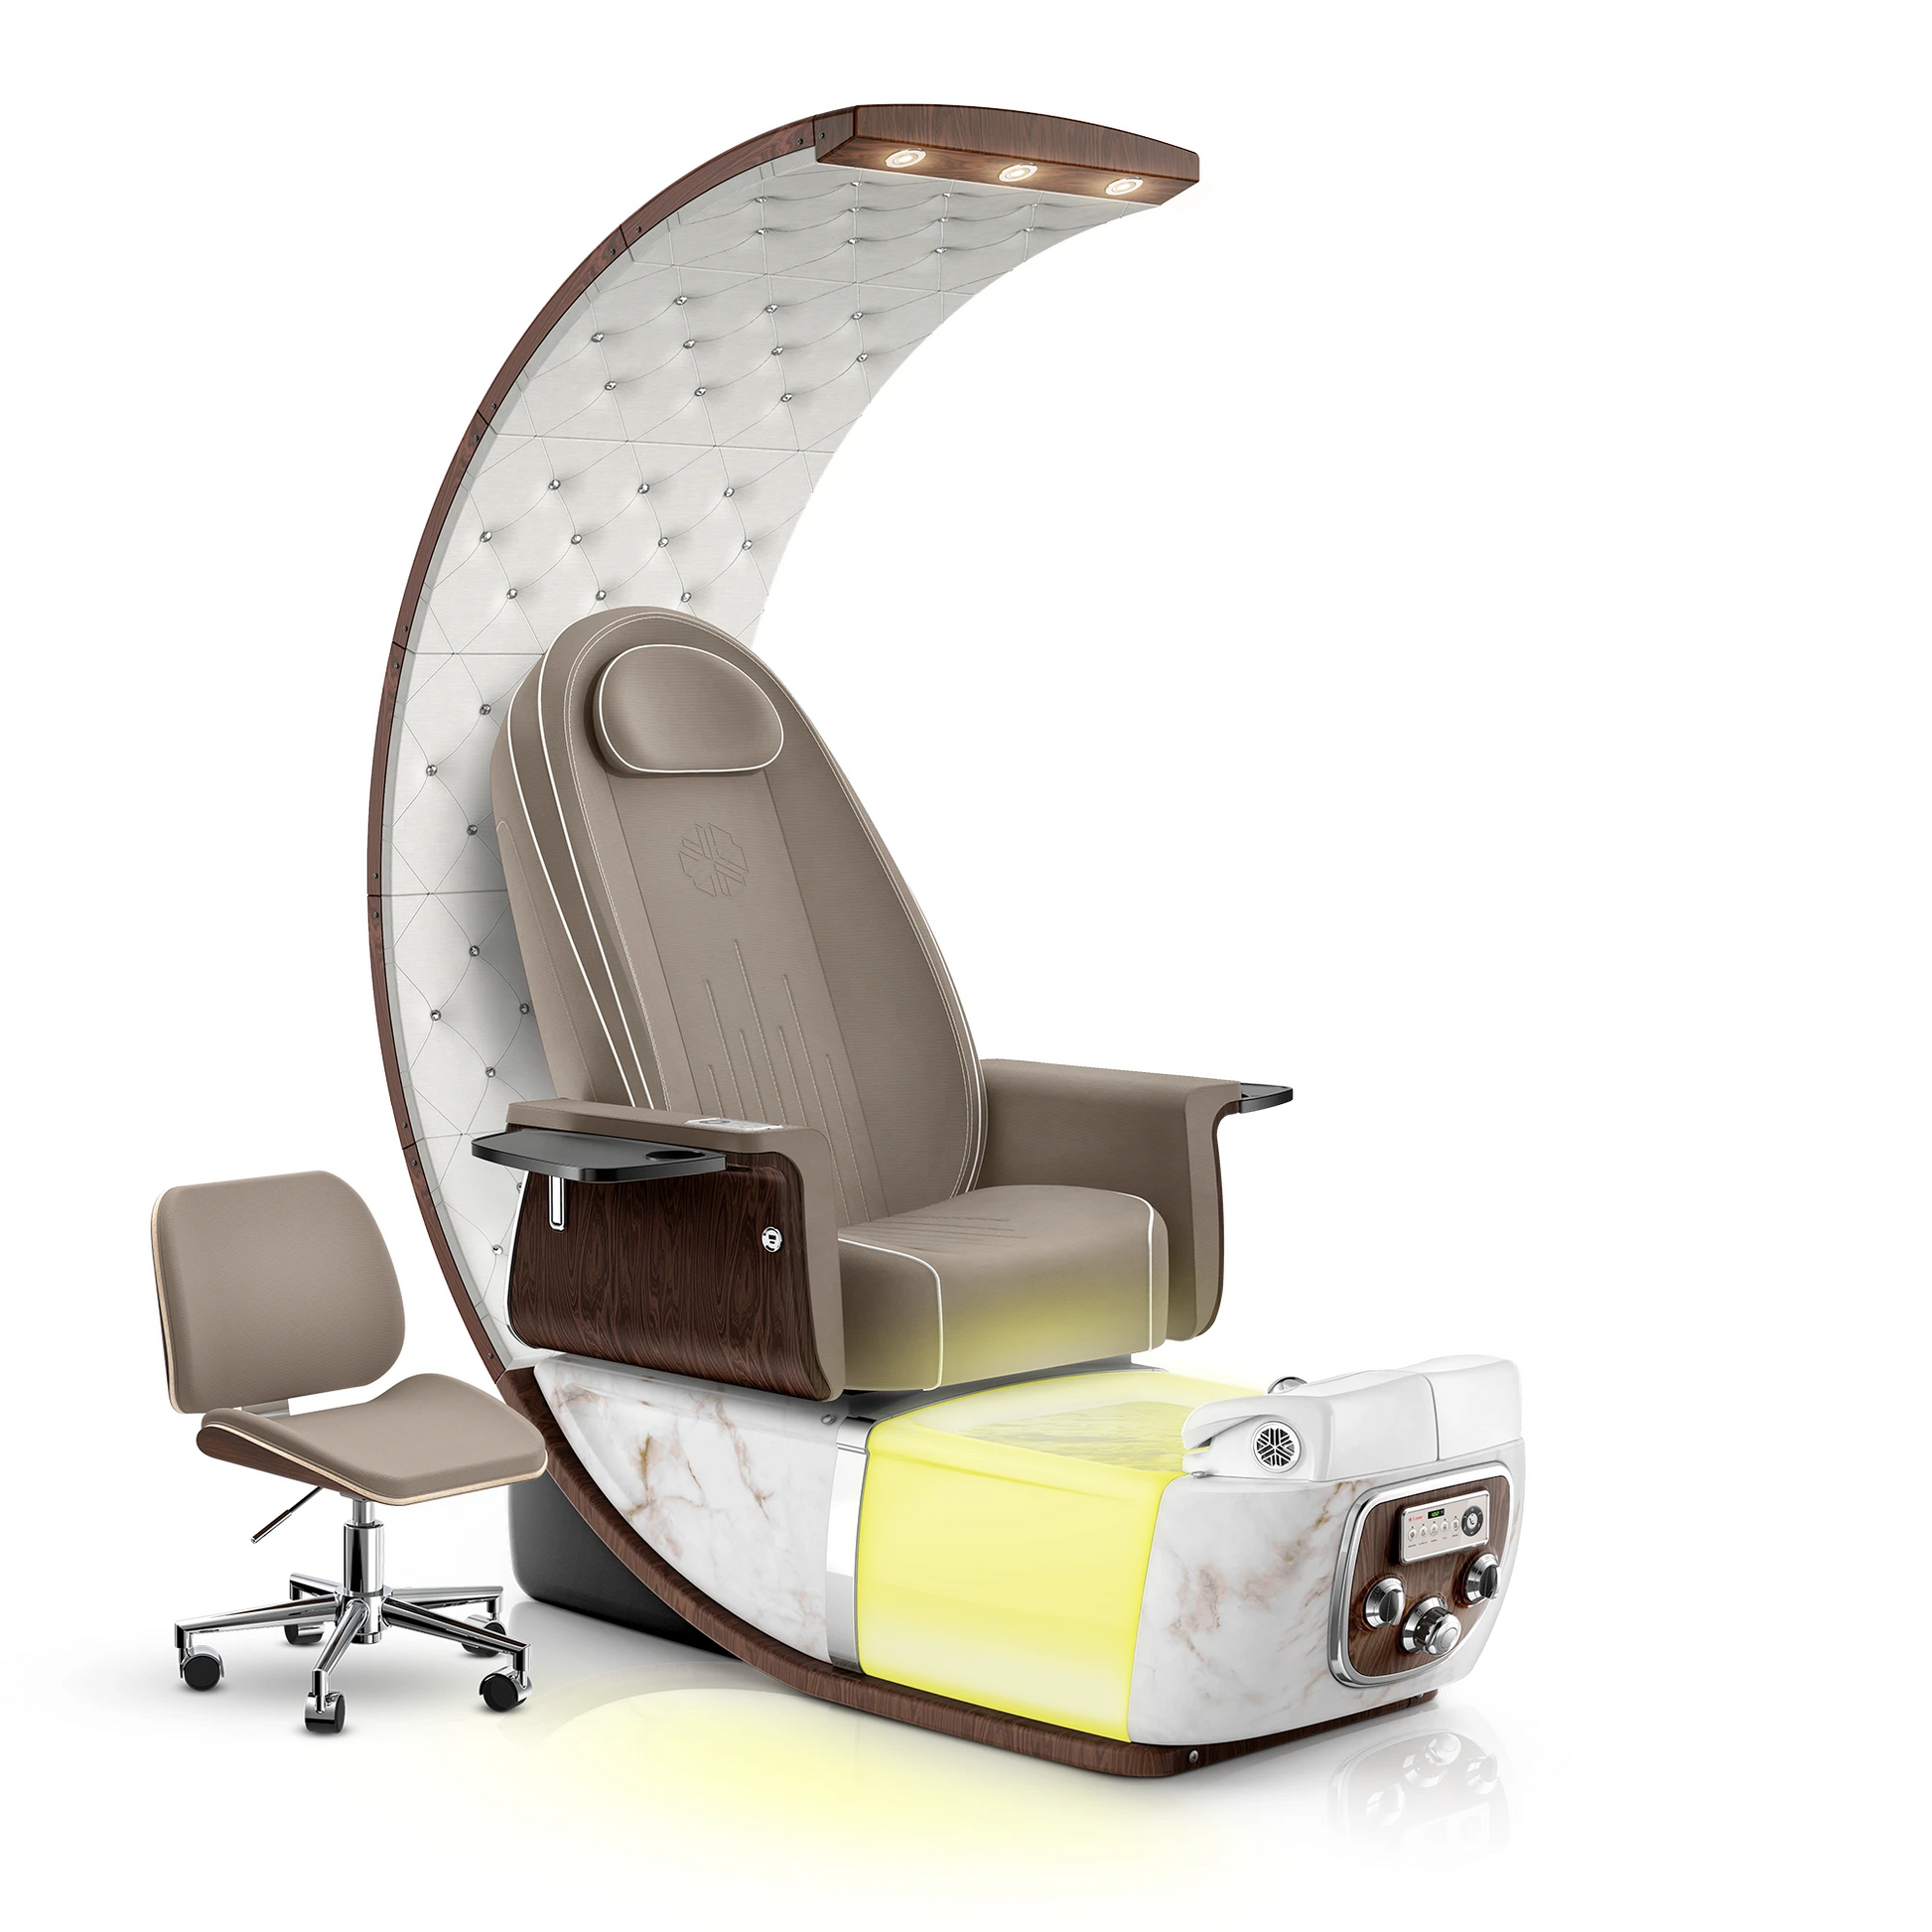 Claystone-White Moonstone Lexor PRIVÉ Lounge Pedicure Chair with LED Bowl